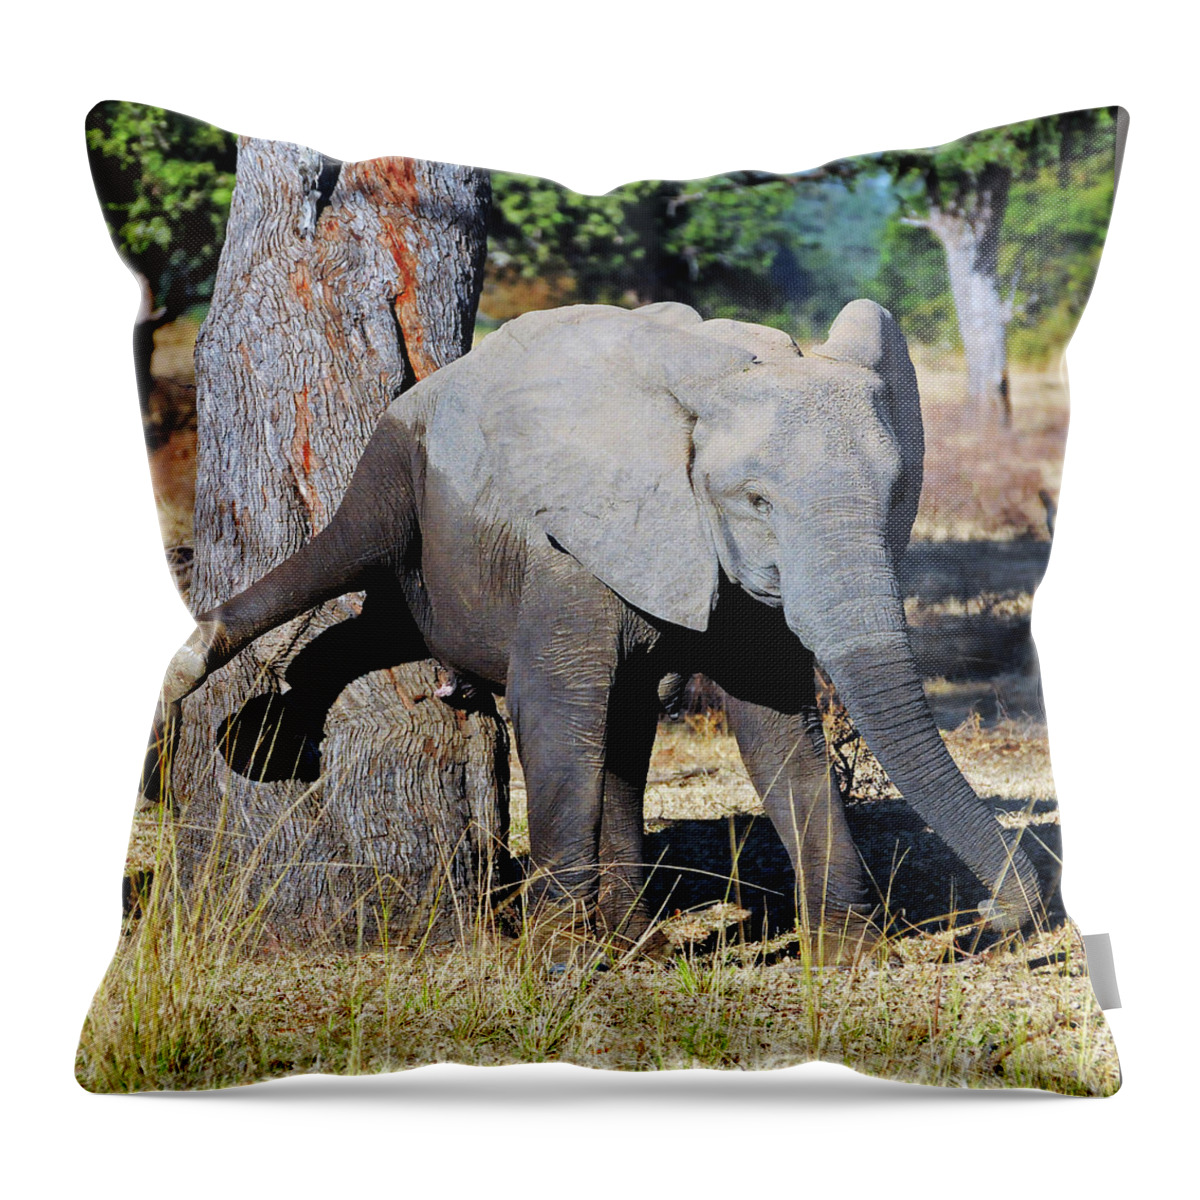 Elephant Throw Pillow featuring the photograph Elephant Scratching Rump by Ted Keller